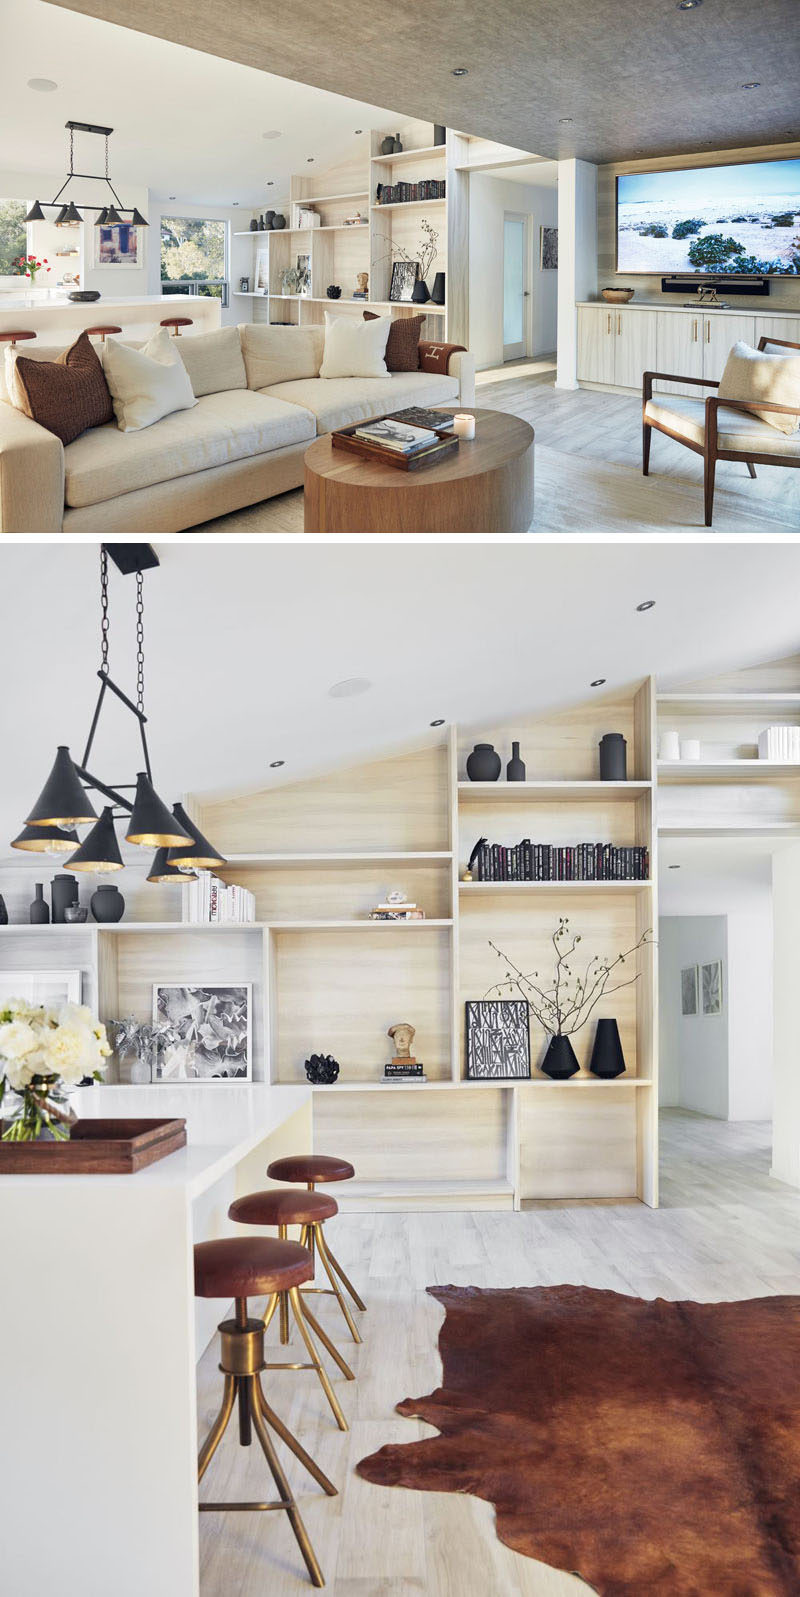 In this home, the main living and kitchen area share the space, with one of the walls covered in light wood shelving, ideal for displaying personal items.